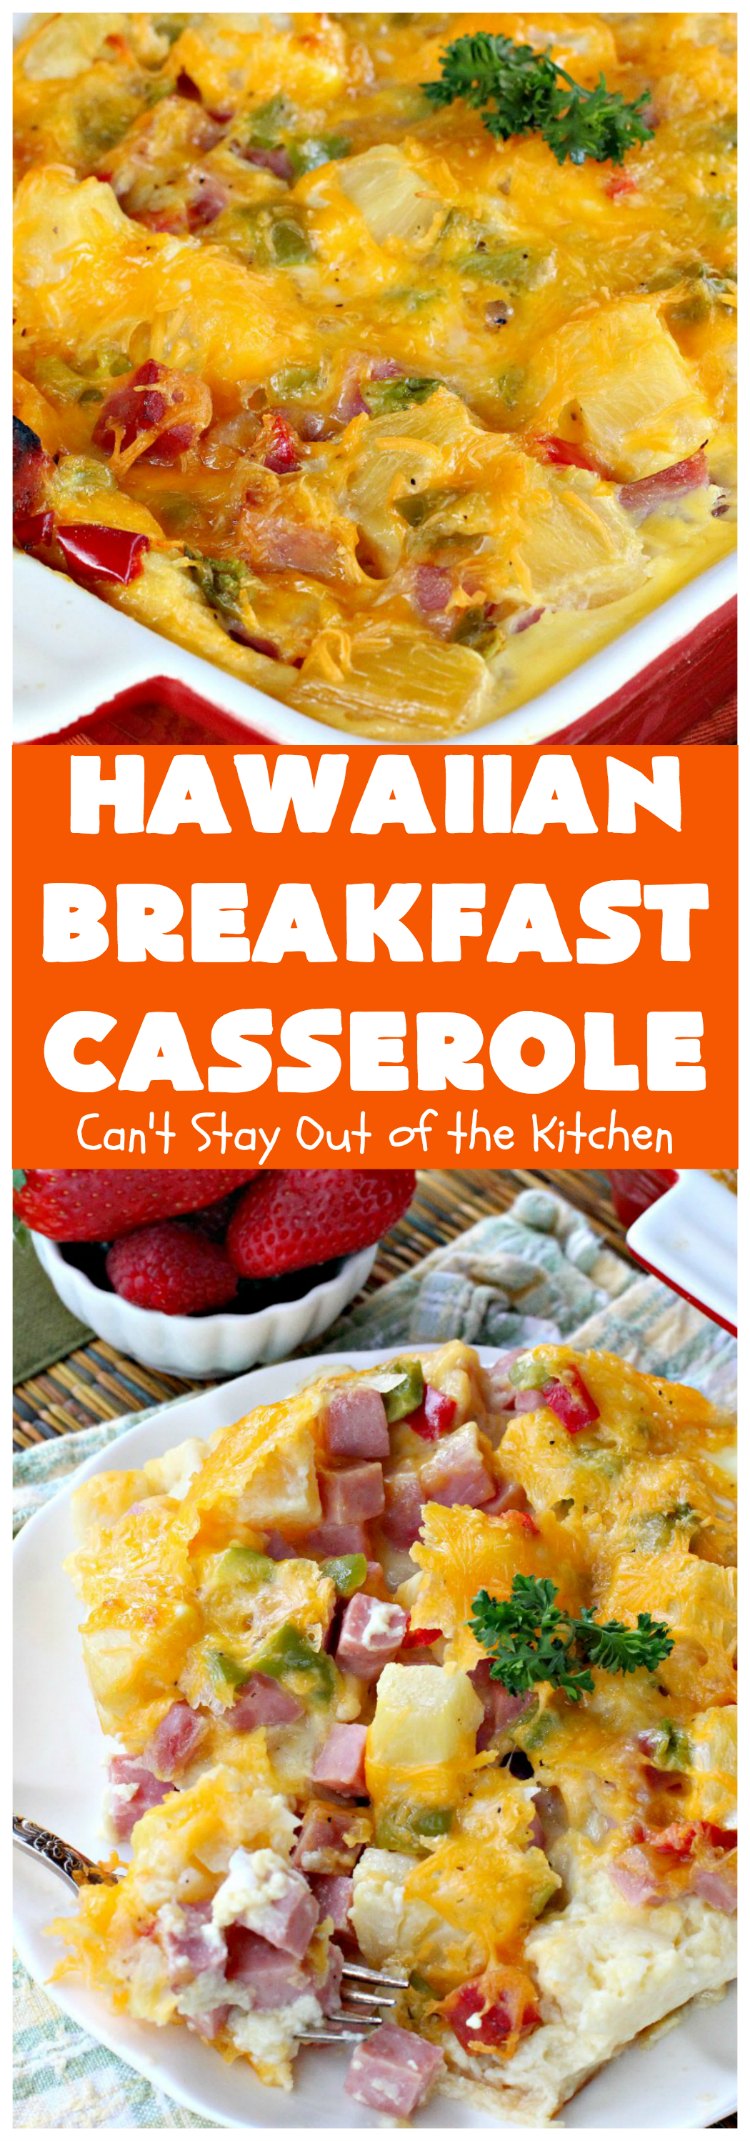 Hawaiian Breakfast Casserole | Can't Stay Out of the Kitchen